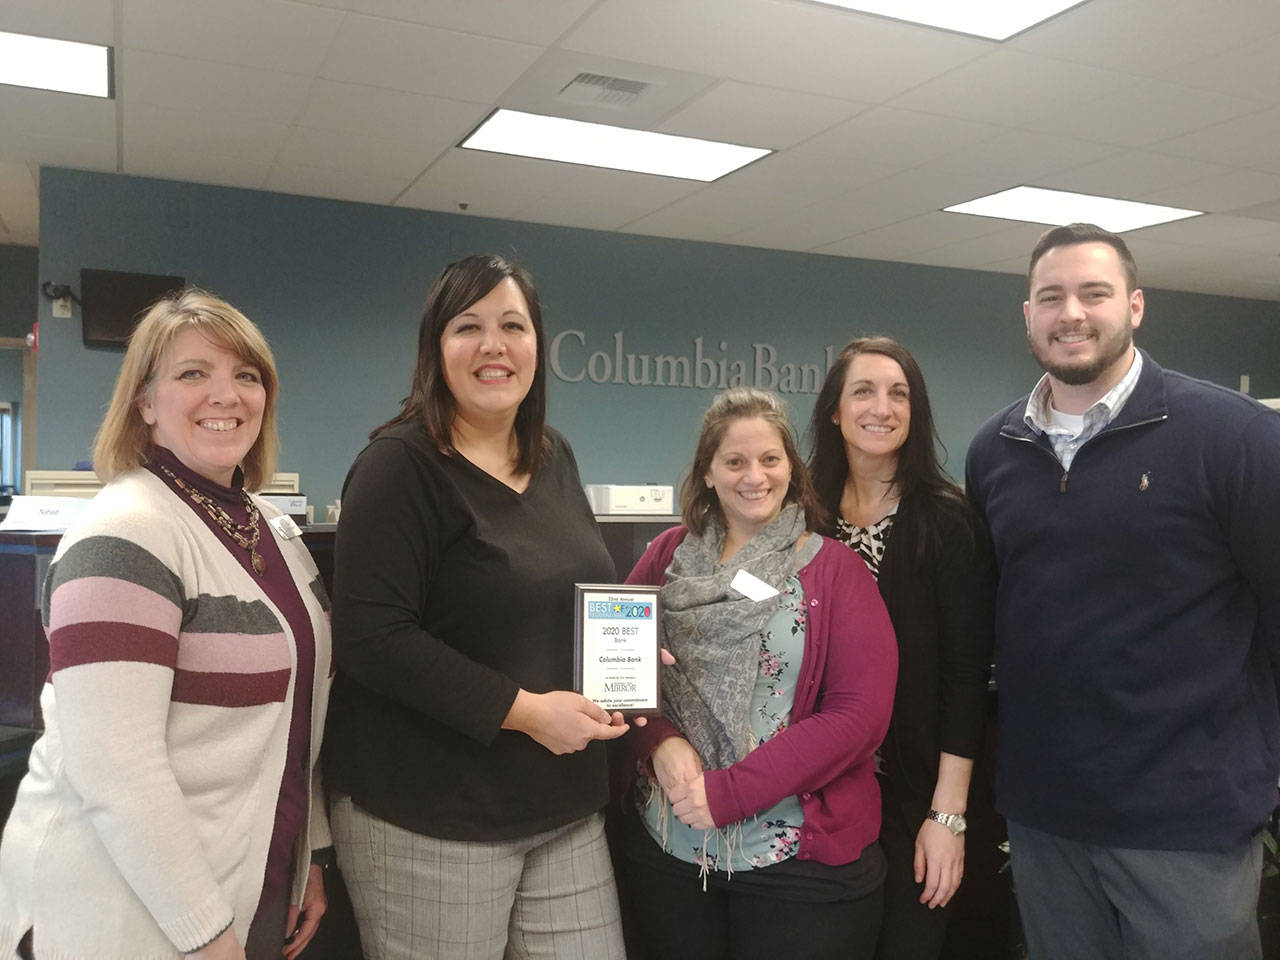 Columbia Bank won first place for Best Bank. Cindy Ducich/staff photo